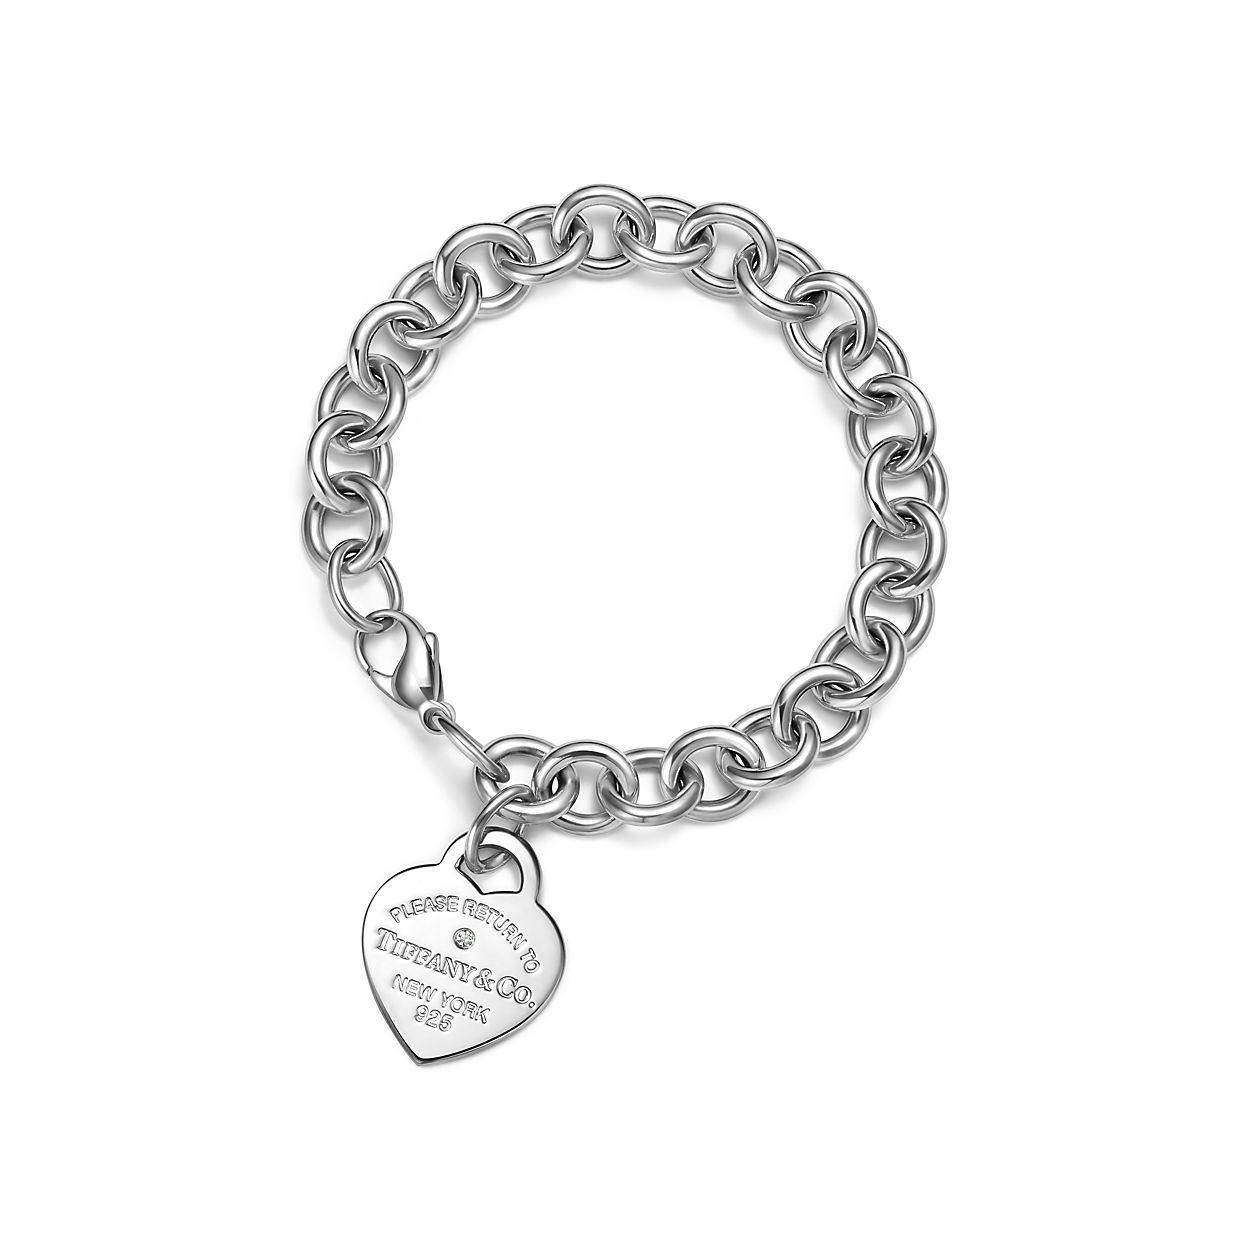 Aeon Jewellery Expanding Baby Bangle  925 Sterling Silver  Bracelet  Engraved With Nursery Rhyme  Perfect as a Christening for a Boy or Girl   Gift Box  Polishing Cloth Included 